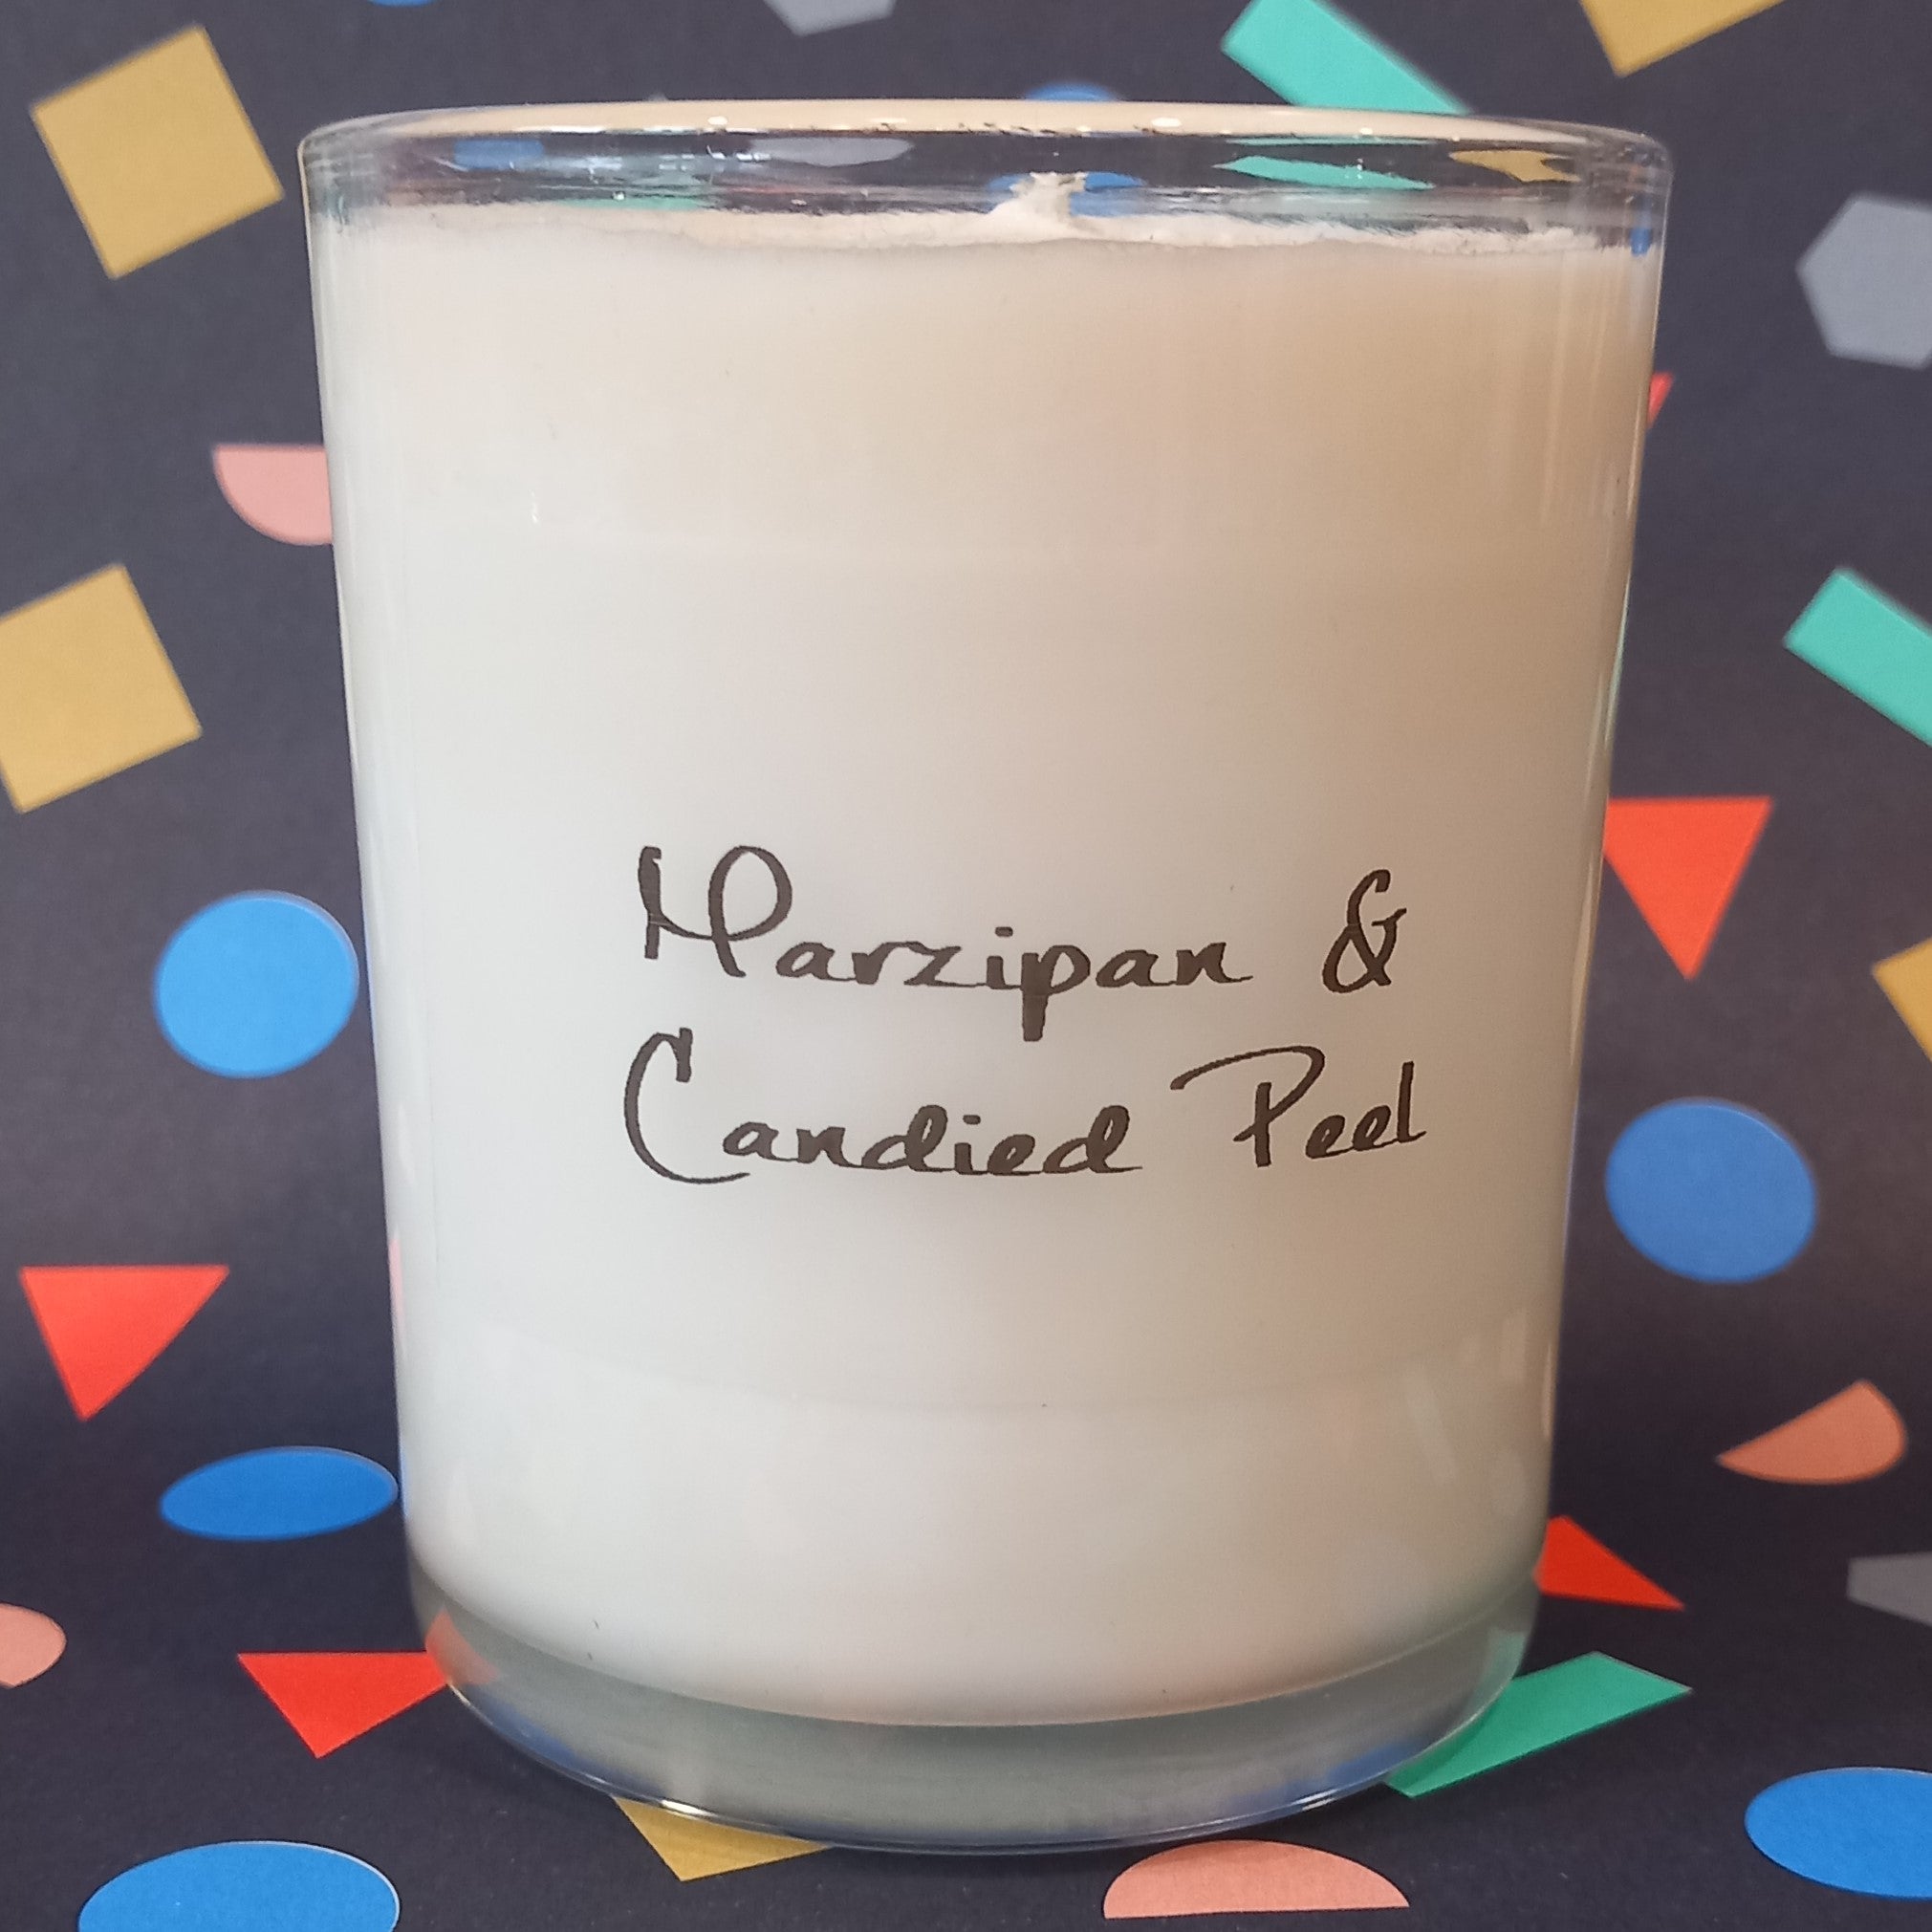 Flux Large Plant Wax Candle - Marzipan & Candied Peel